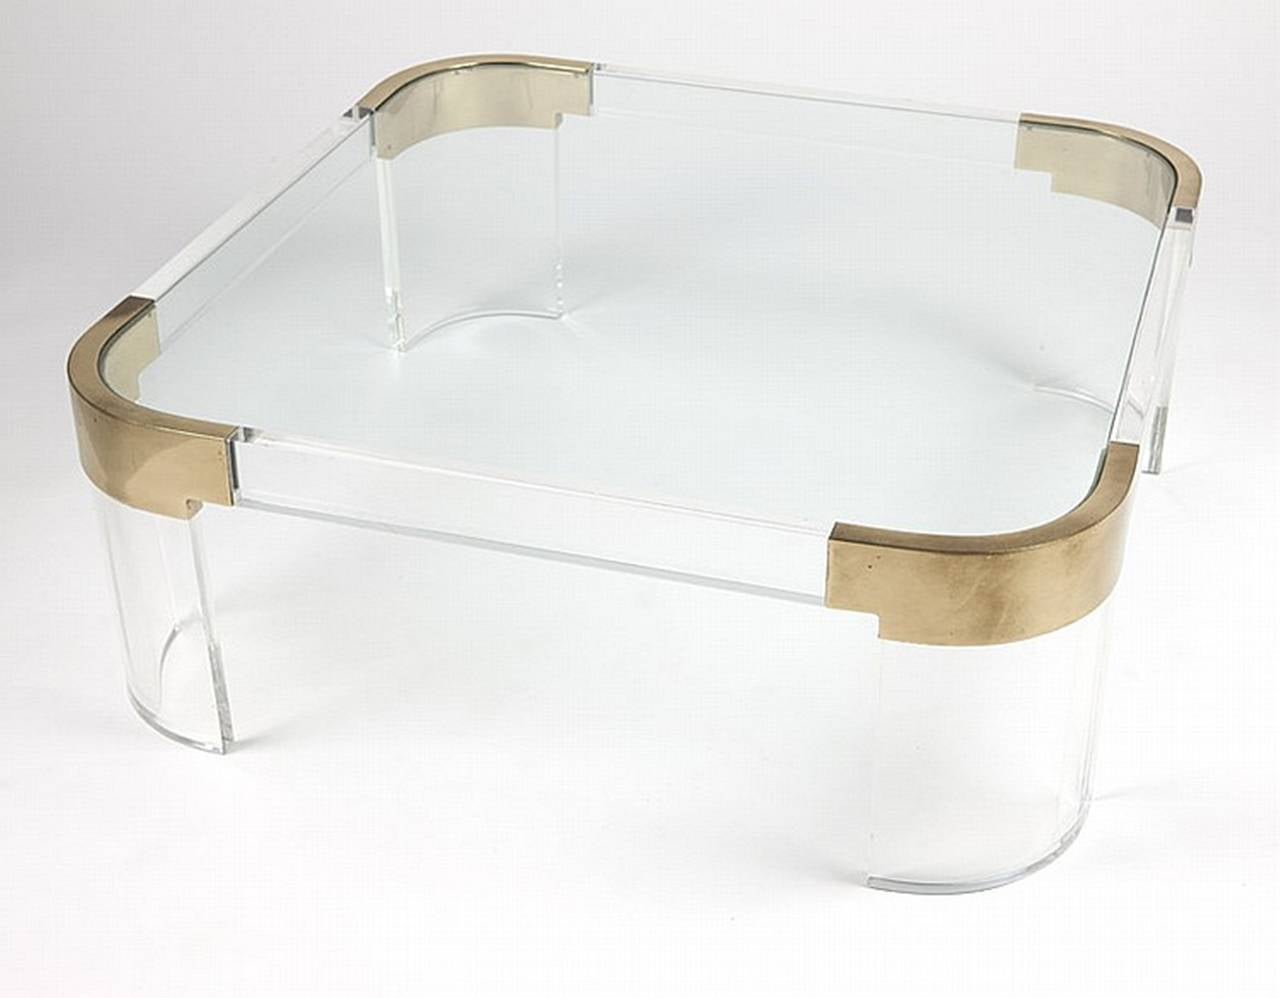 Sleek coffee table executed in Lucite and solid brass designed in the 1970s by the Lucite icon, Charles Hollis Jones. The table is part of Charles Hollis Jones 